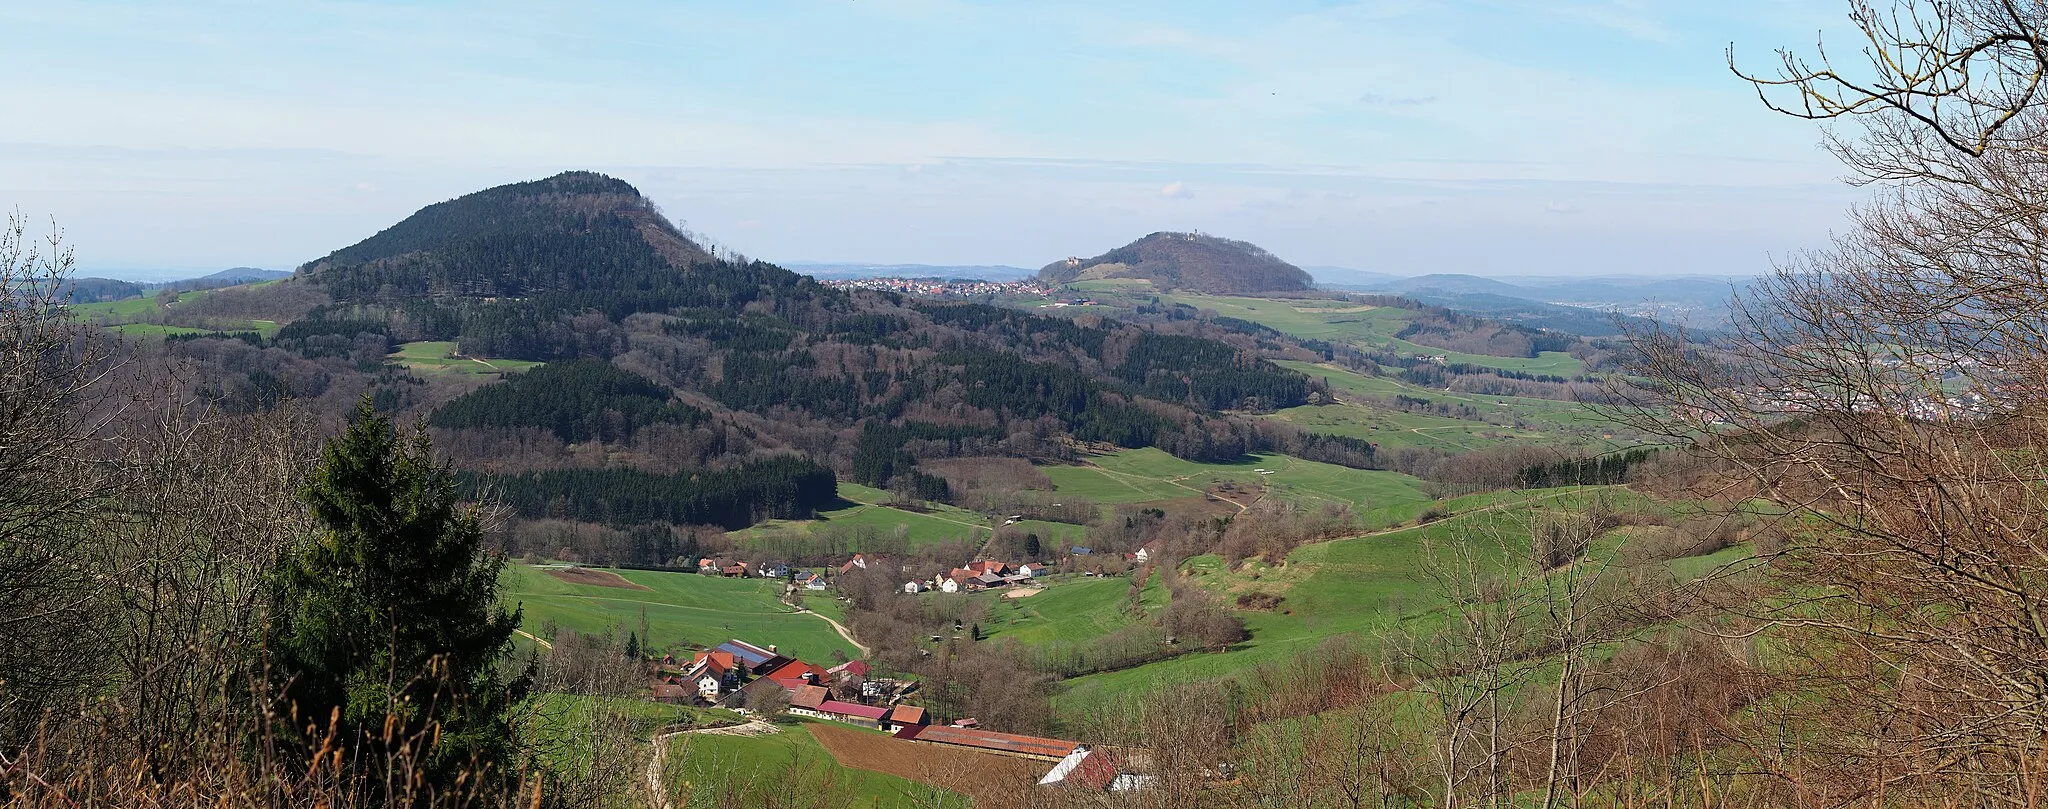 Photo showing: View from Hornberg col towards Stuifen and Rechberg mountains